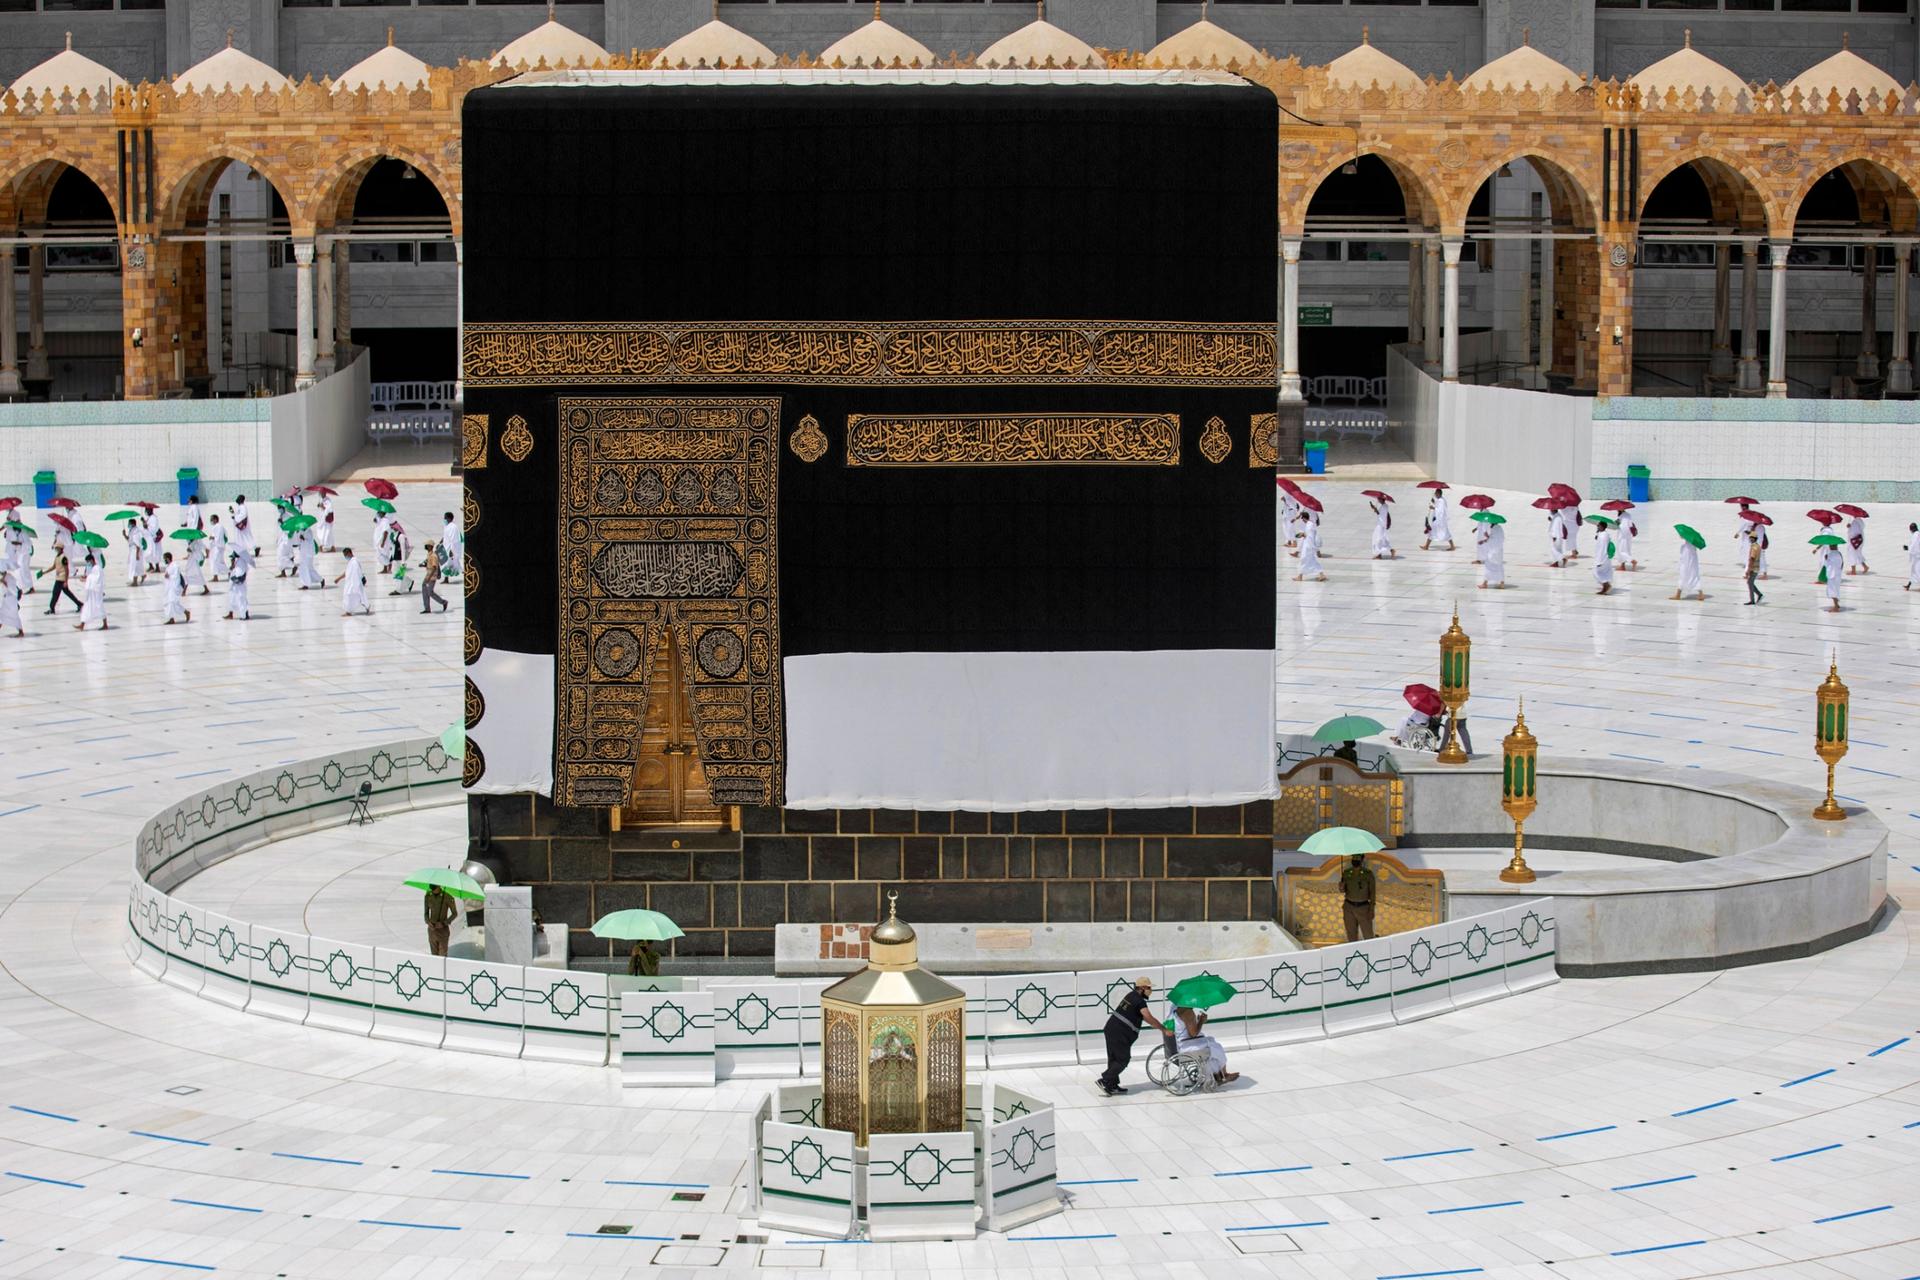 The cube-like Kaaba is shown center frame with a pilgrim being pushed in a wheelchair in the nearground.